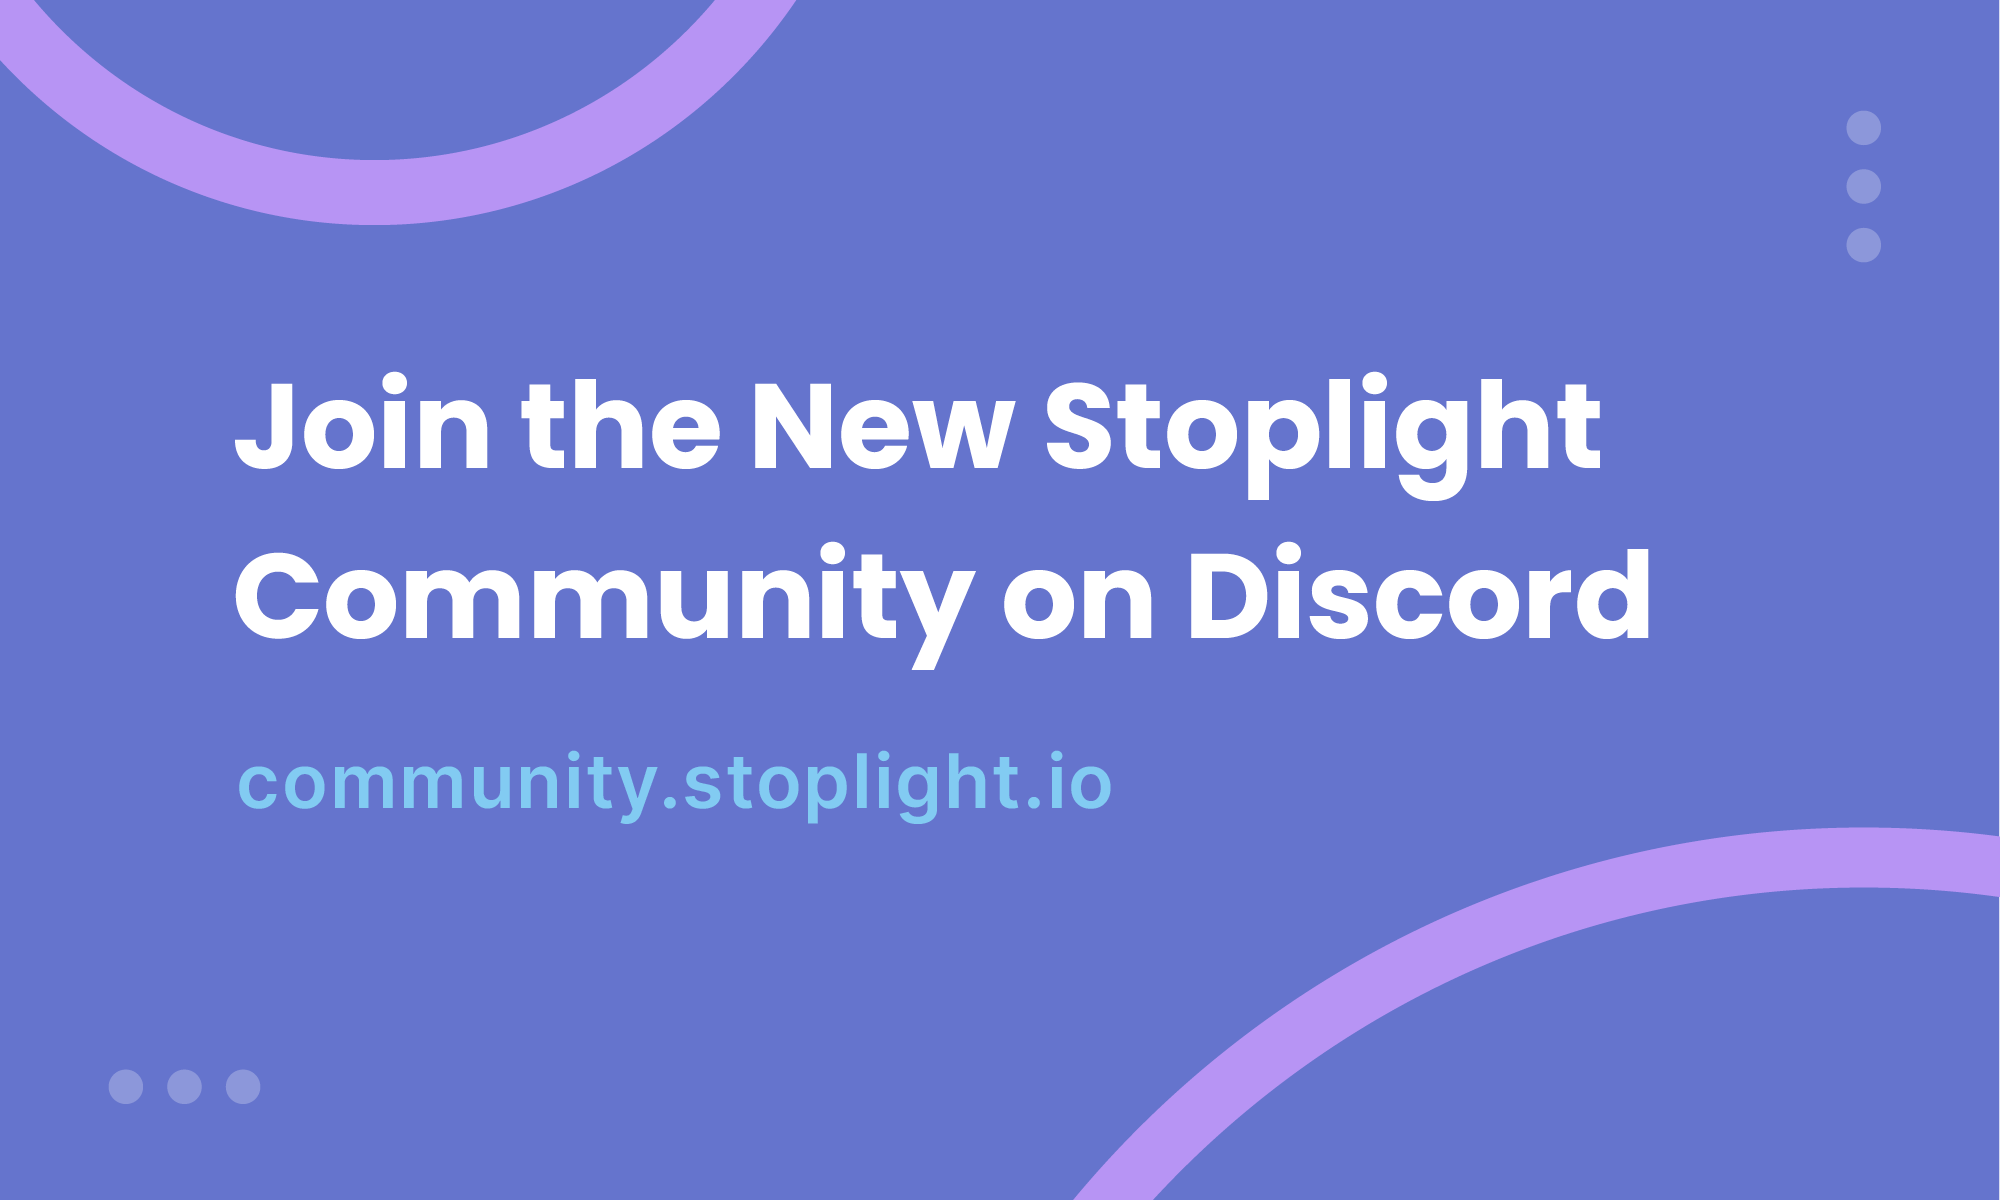 Creating Connections: Join the New Stoplight Community